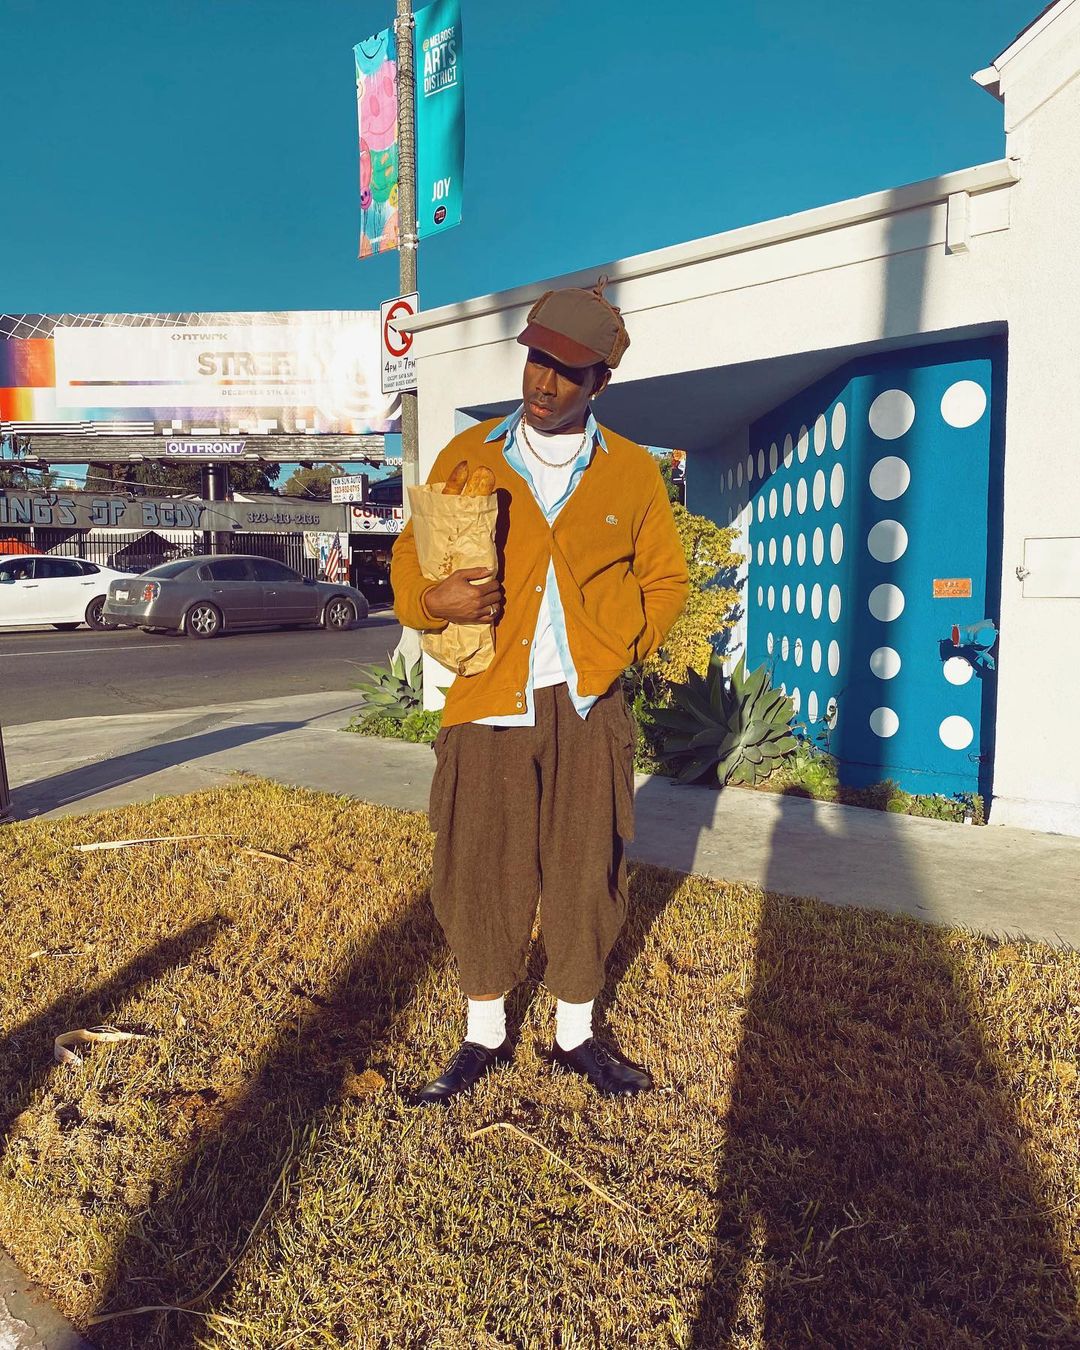 SPOTTED: Tyler, The Creator Continues to Perfect his Grandad